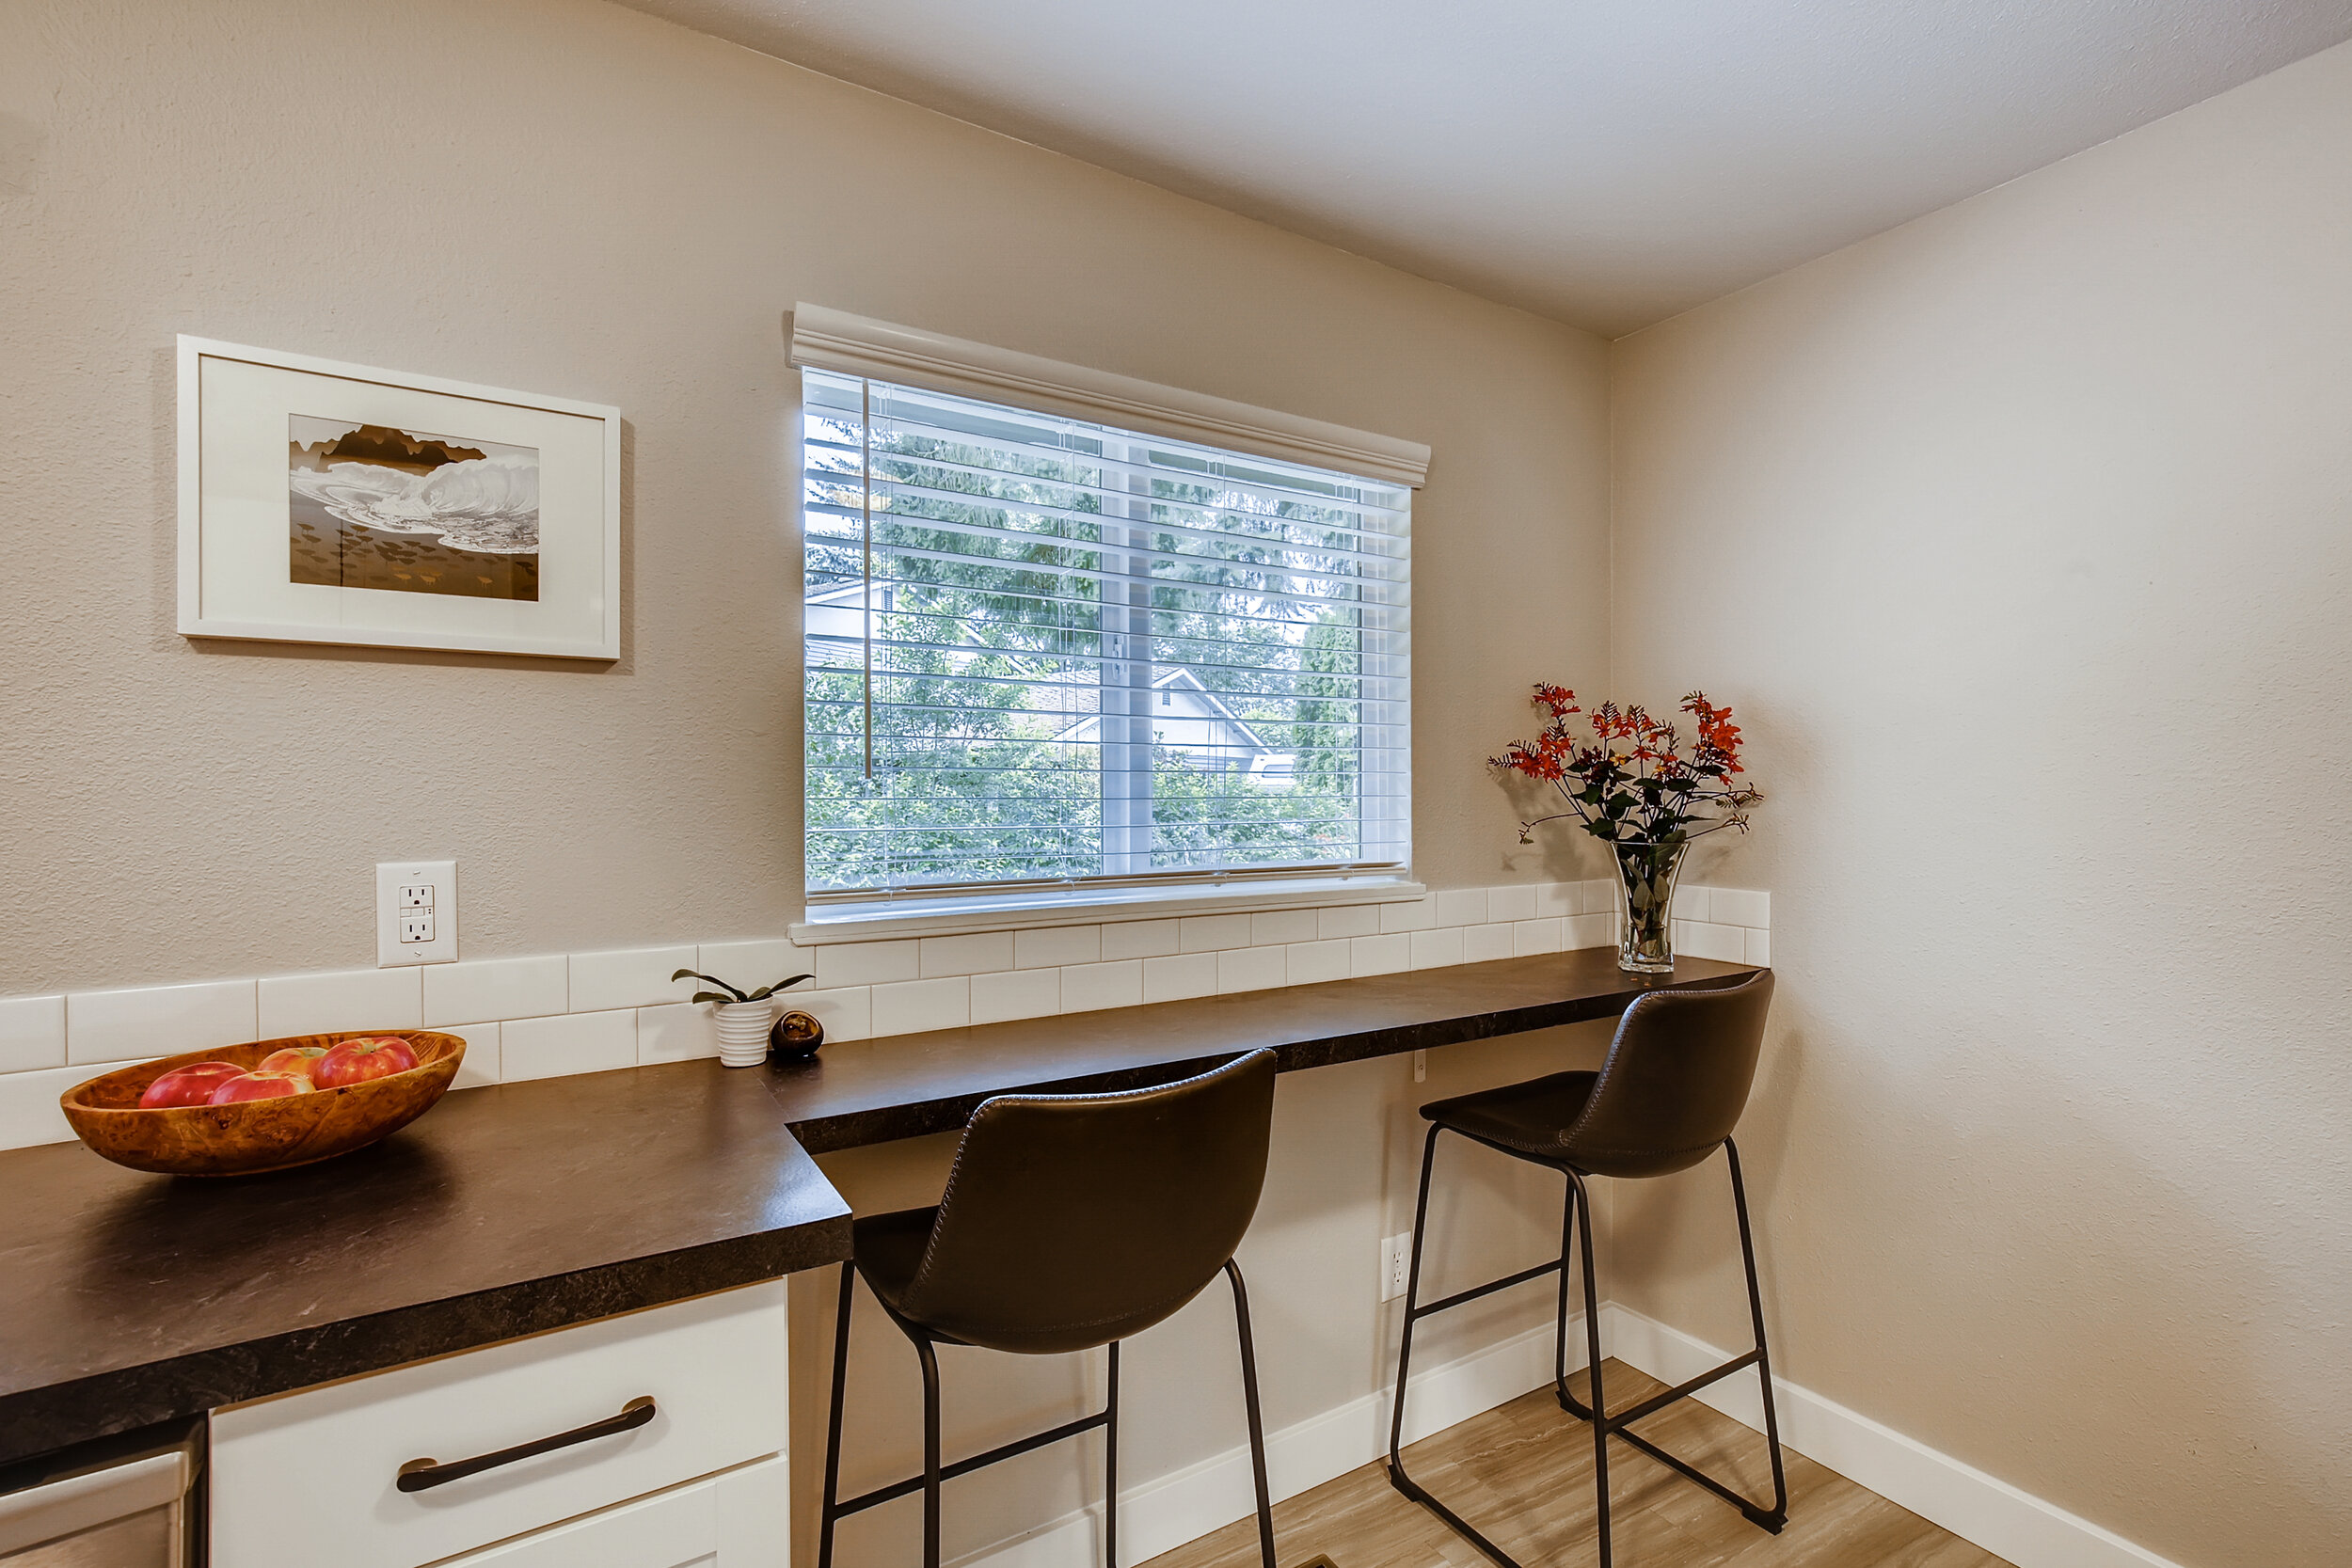 21604 9th Ave W Bothell WA - Print Quality - 014 - 20 Breakfast Area.jpg